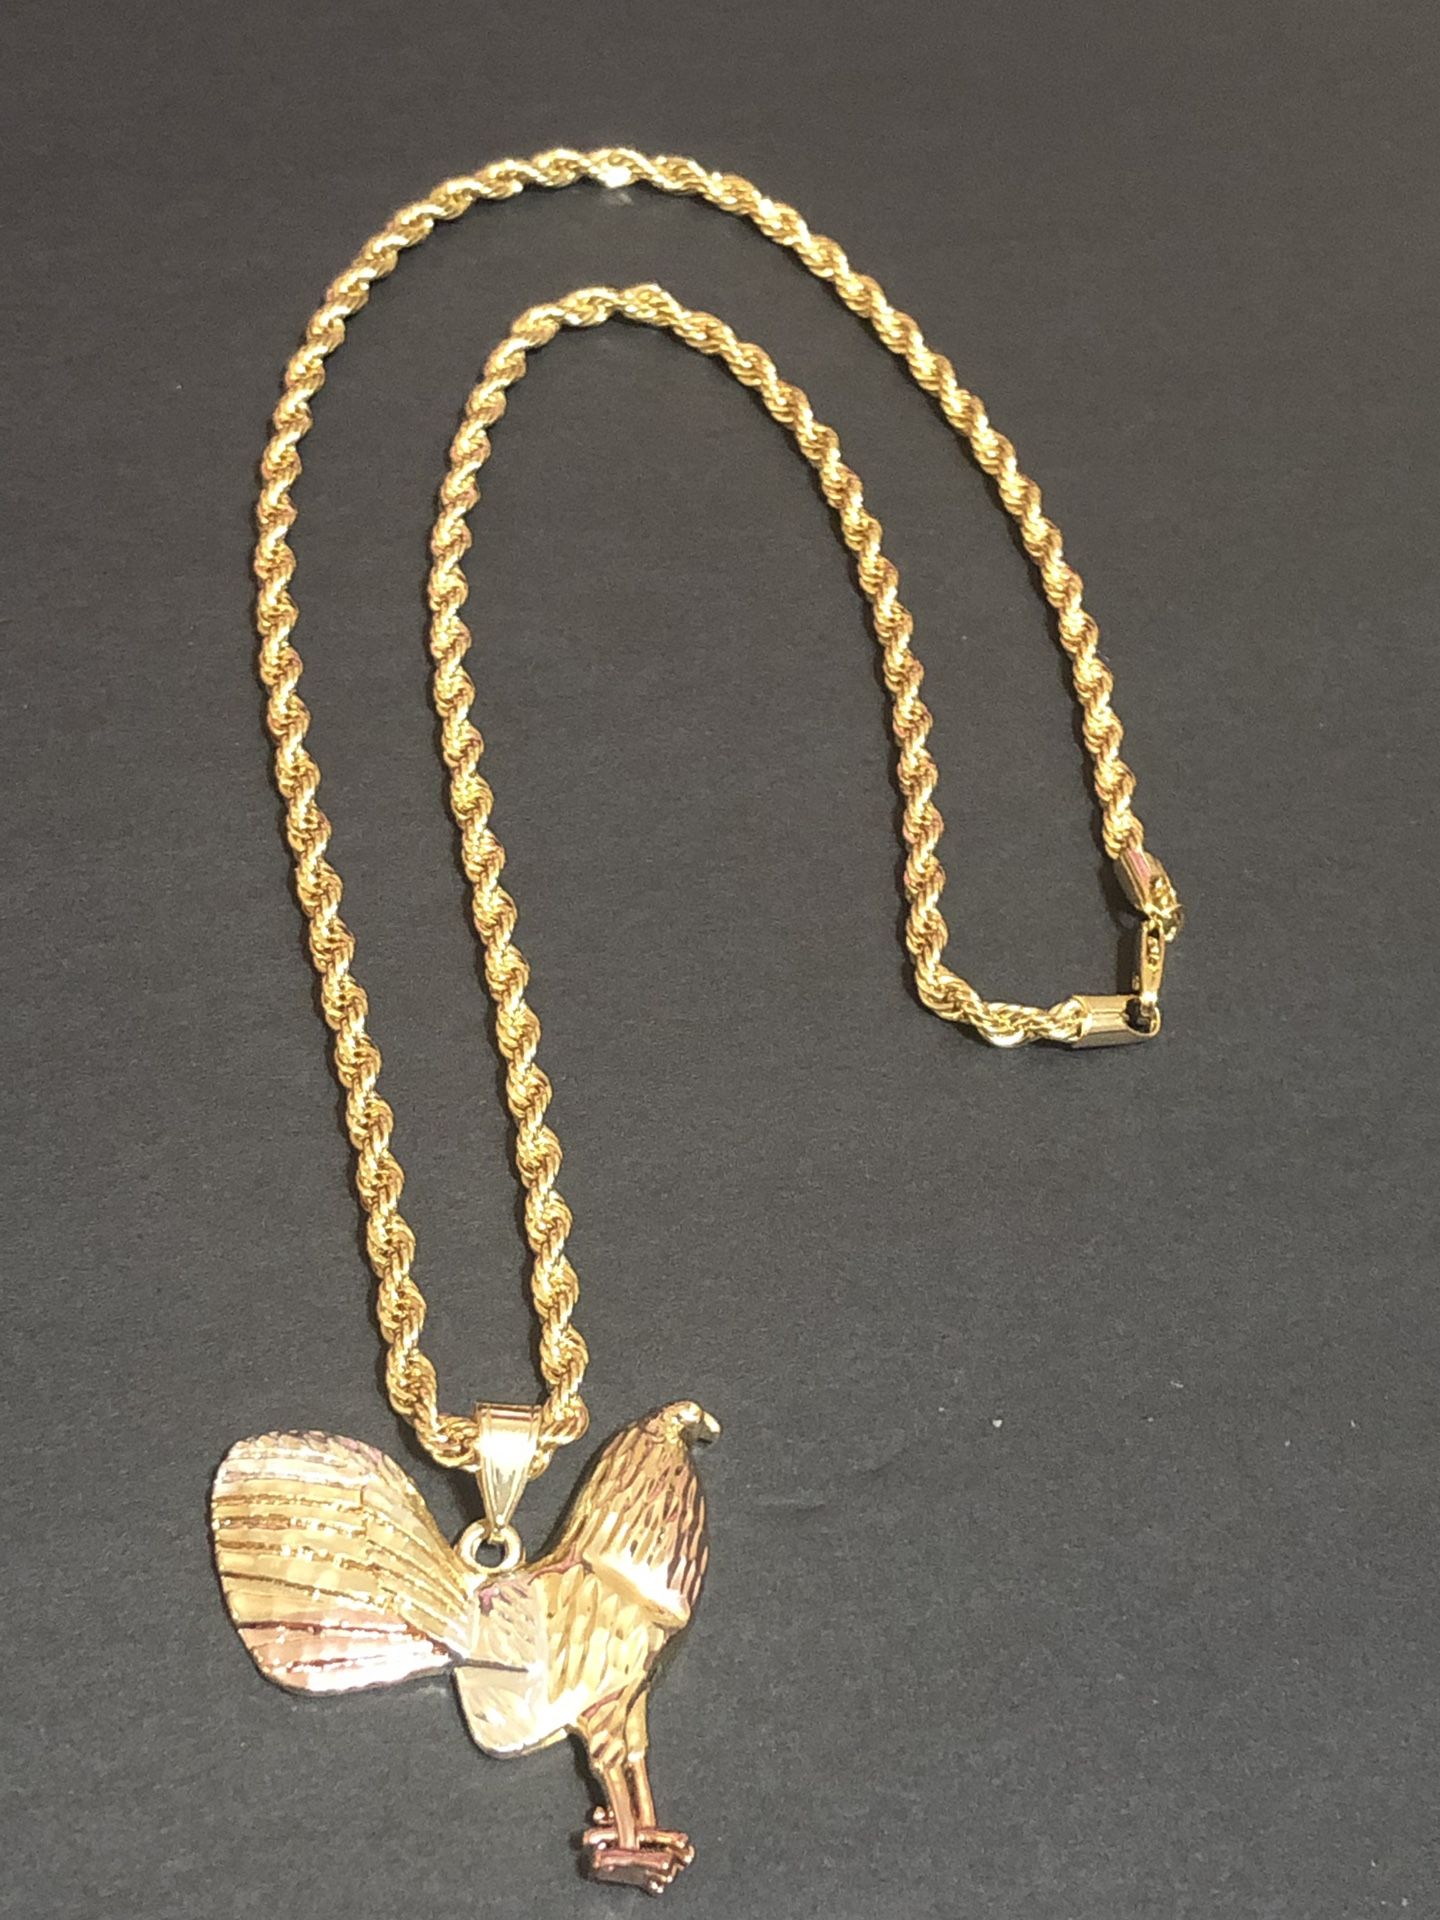 Rope style GOLD PLATED OVER BRASS 4mm Necklace 24inches In Length With Tri Color Rooster Charm